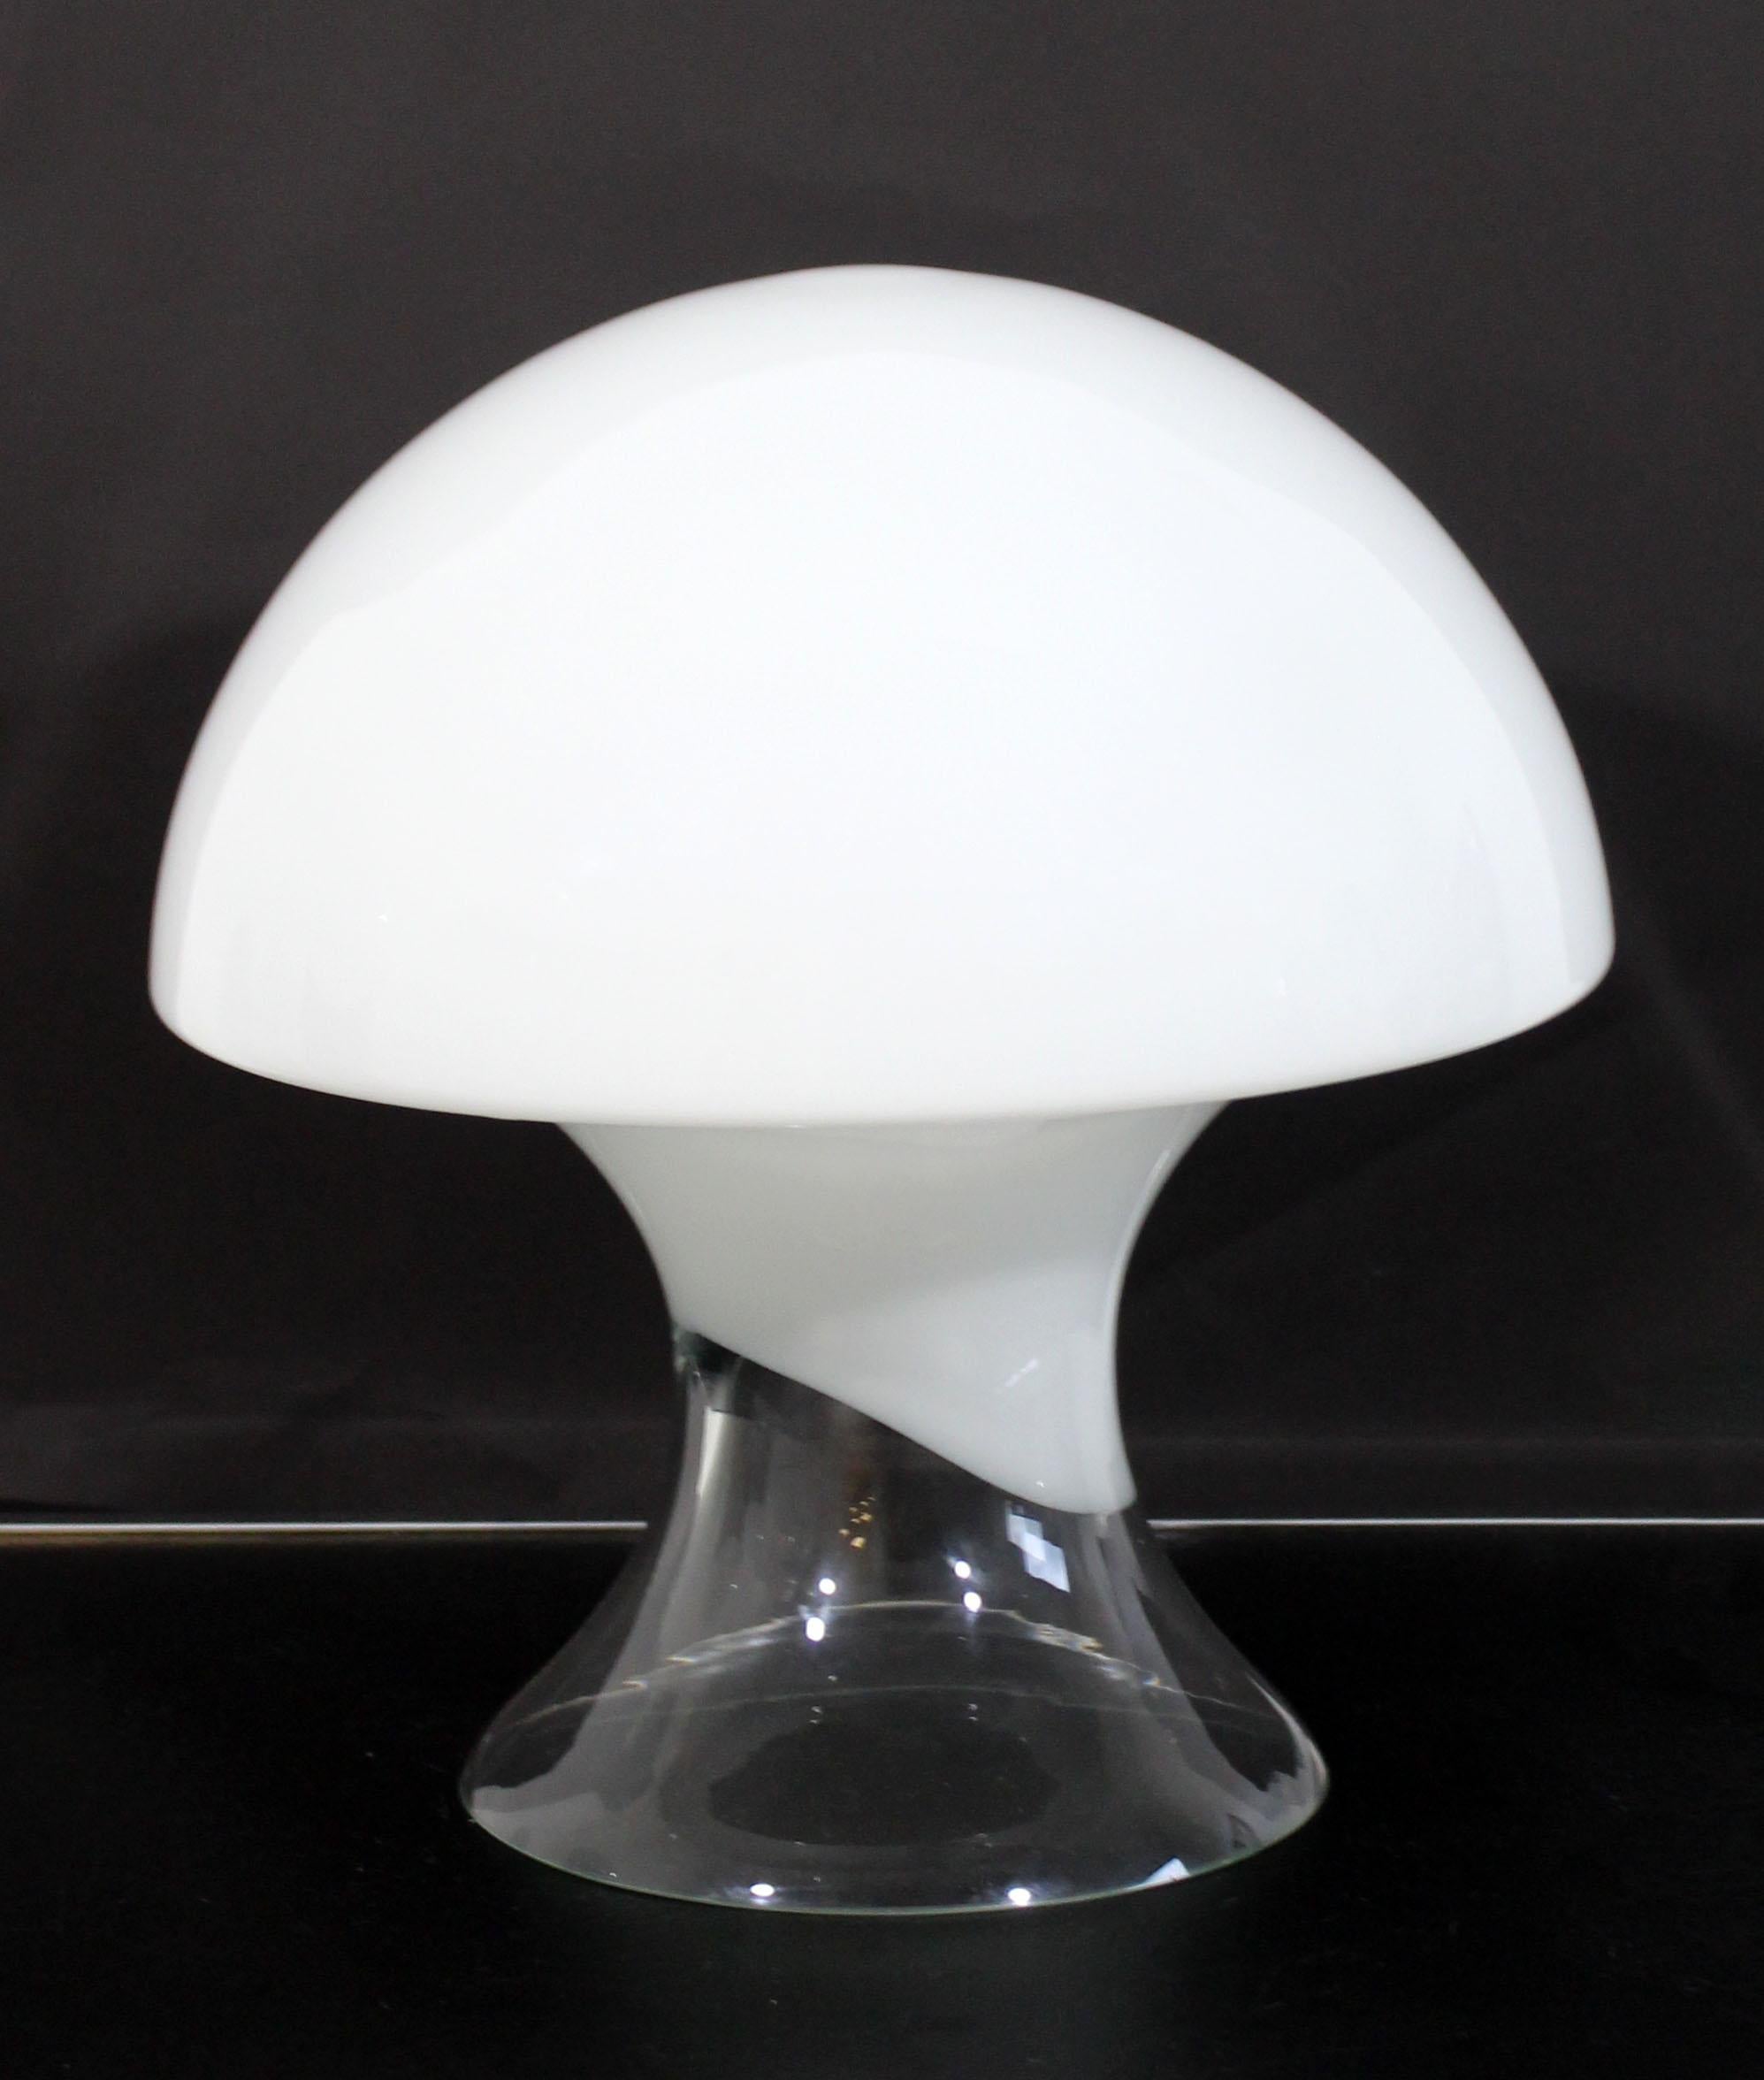 For your consideration is a fabulous, mushroom shaped table lamp, made of a single sheet of white and clear Murano glass, by Gino Vistosi, circa the 1970s. In excellent condition. The dimensions are 12